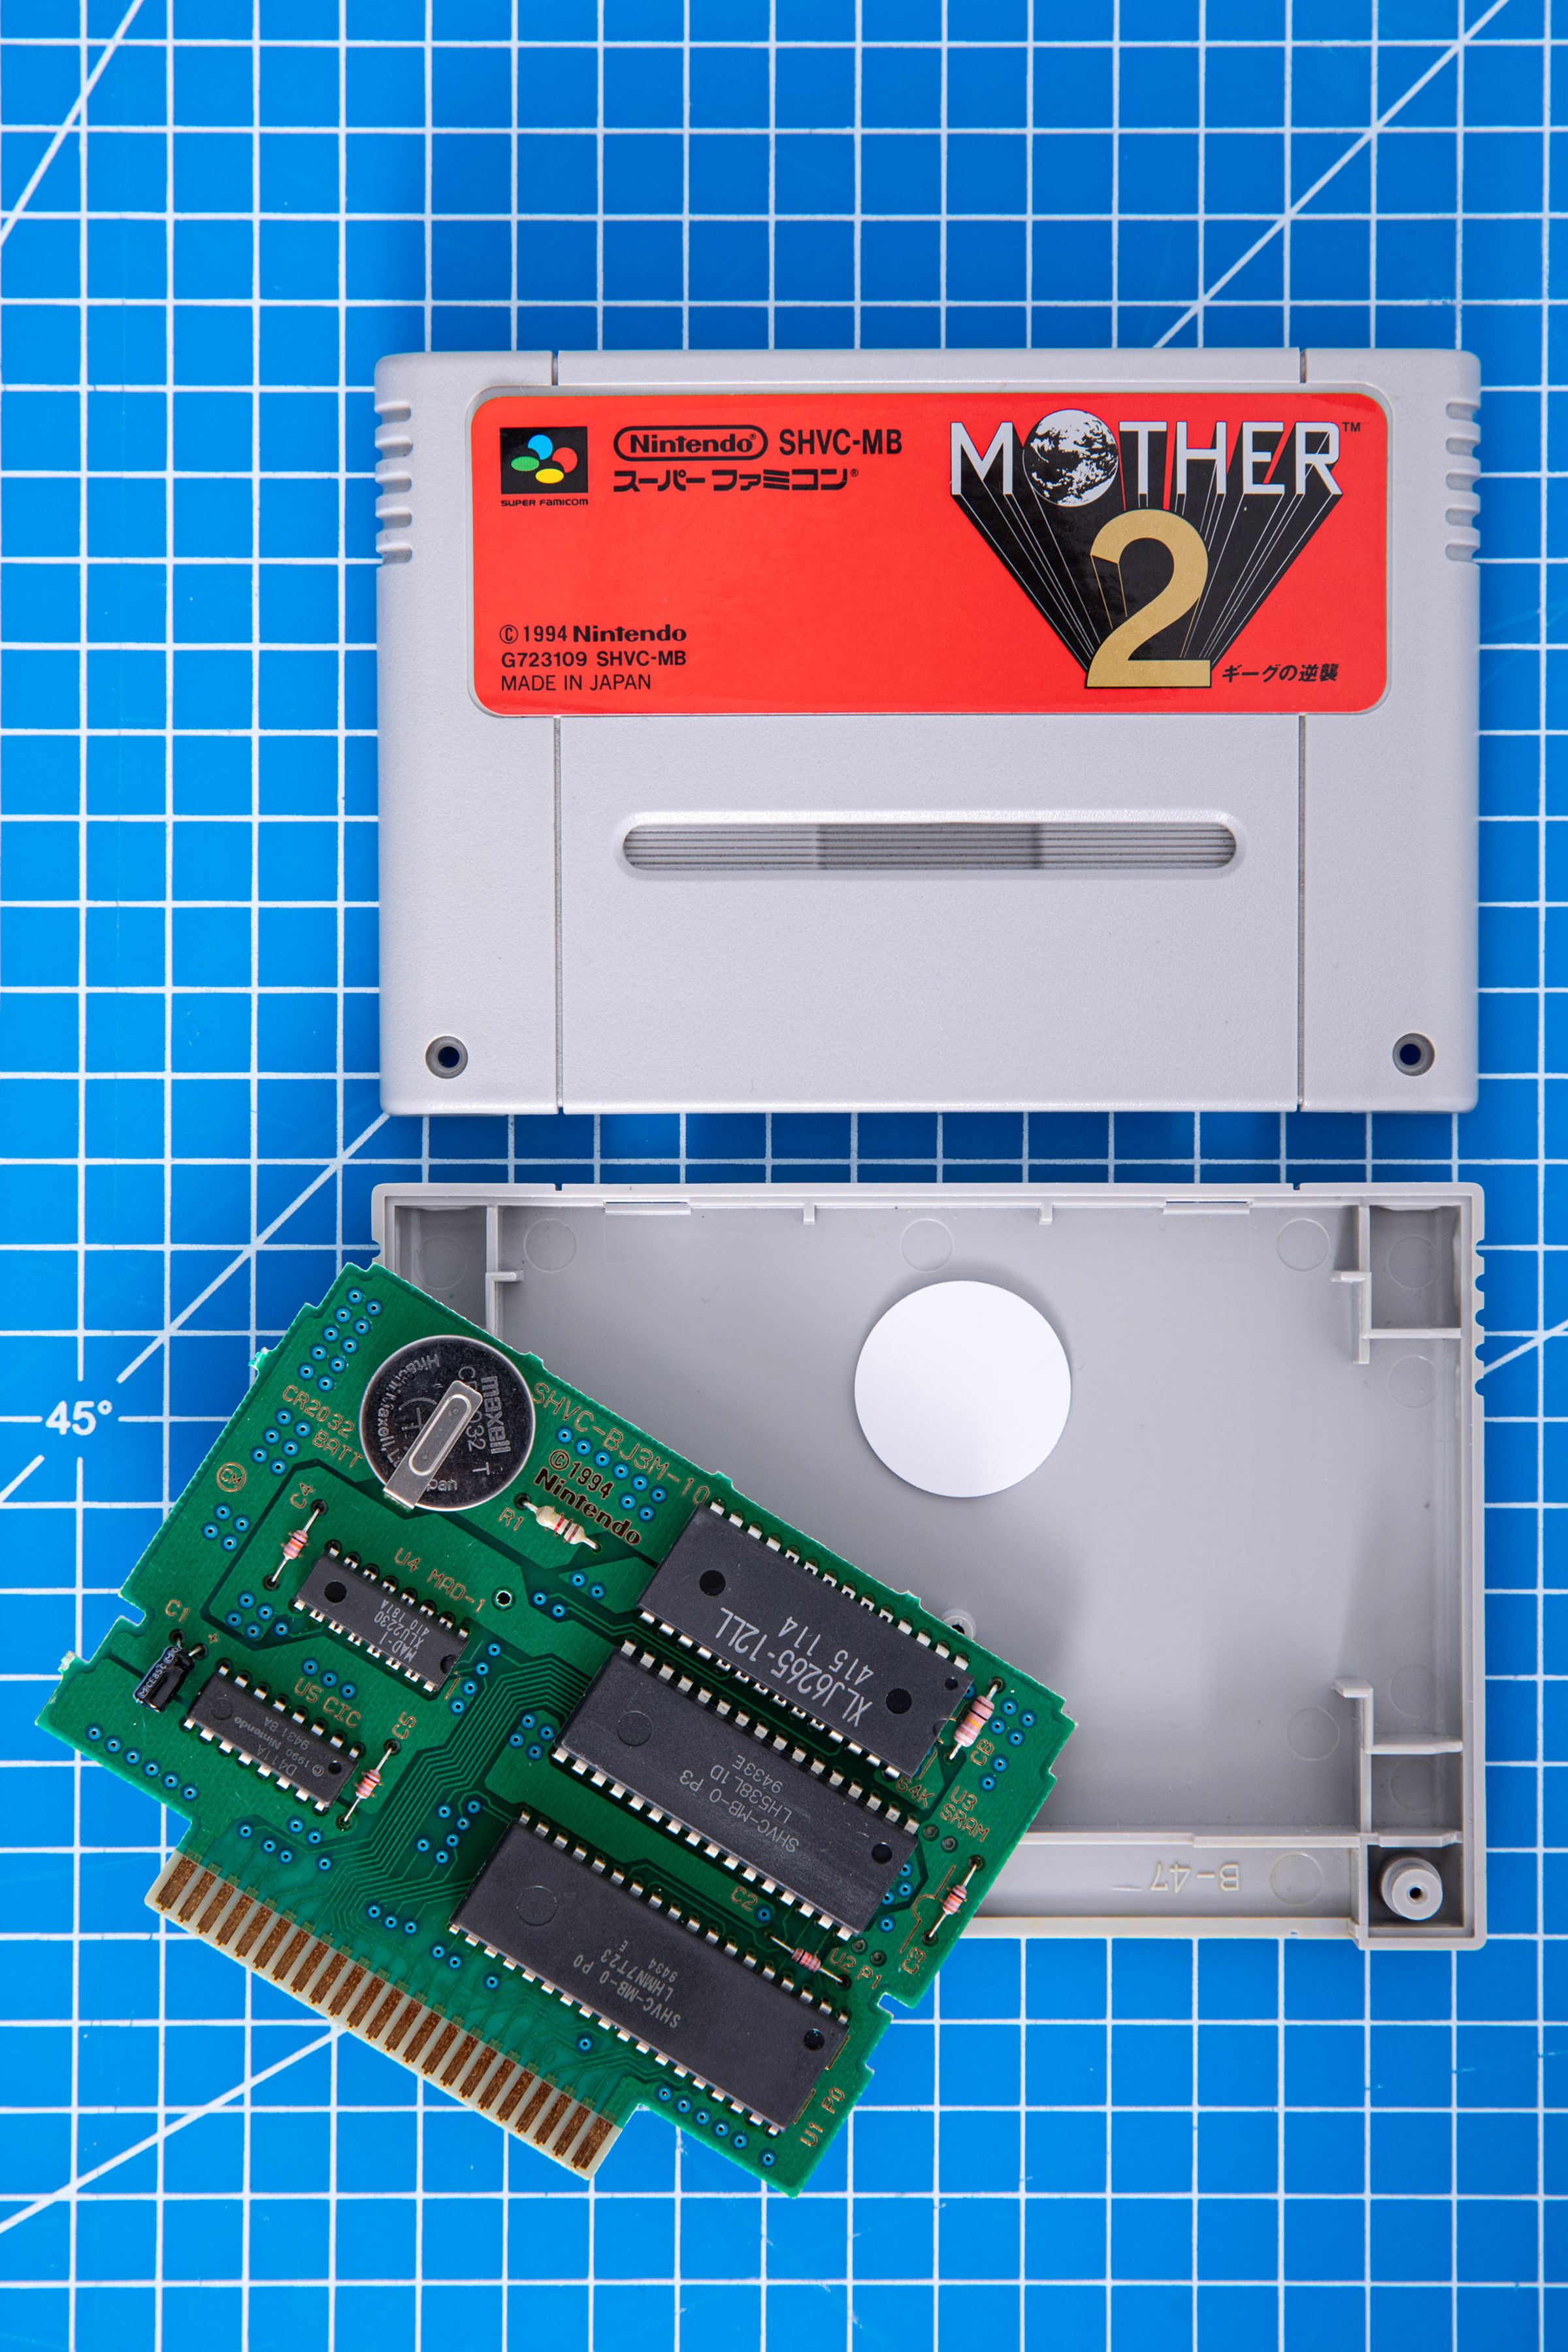 This NFC sticker triggers the North American version of Mother 2... because I don’t have a copy of the wildly expensive EarthBound.